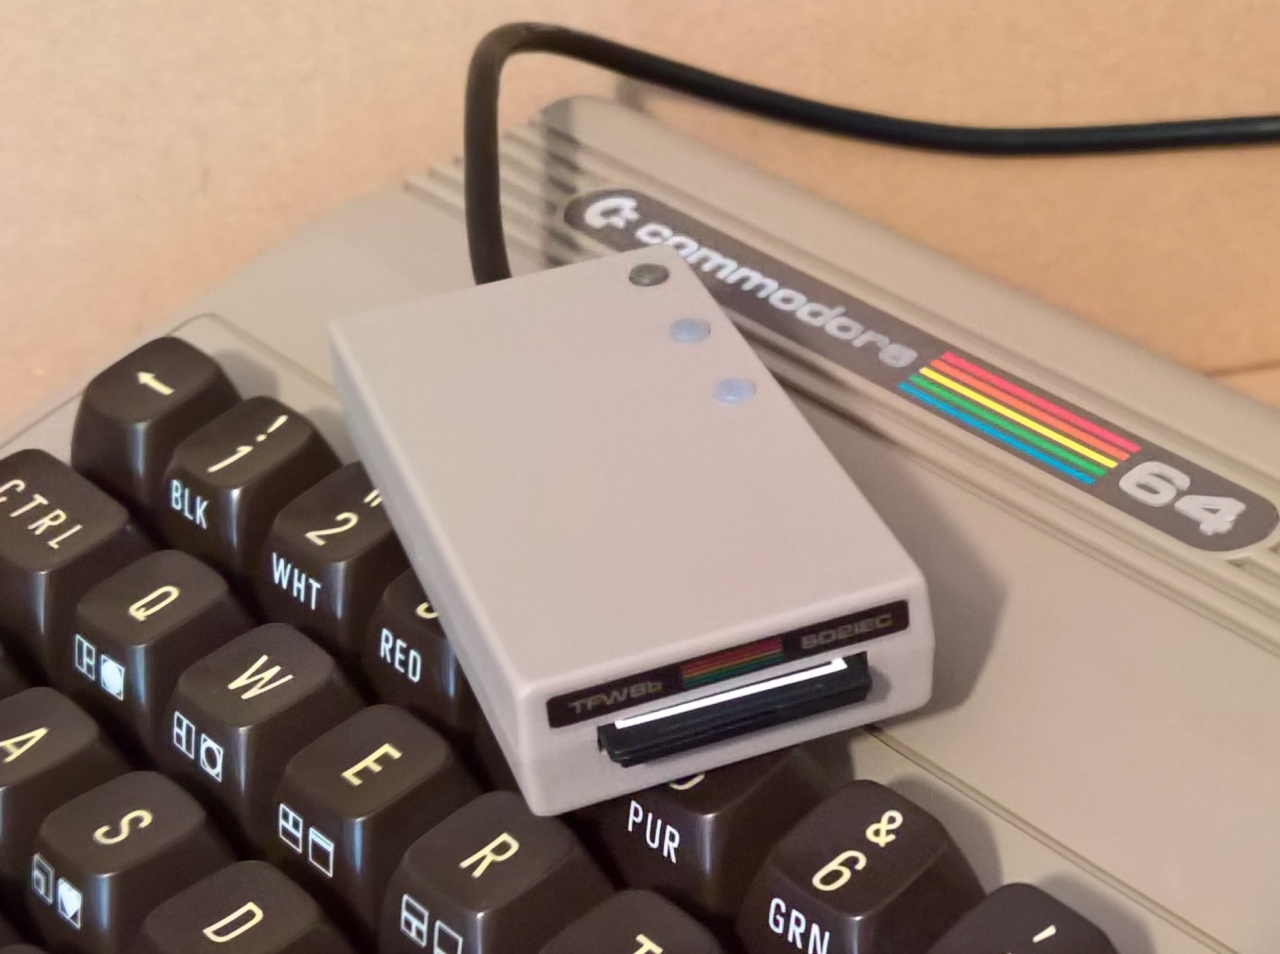 LIMITED EDITION Genuine recycled C64 plastic Cased SD2IEC+